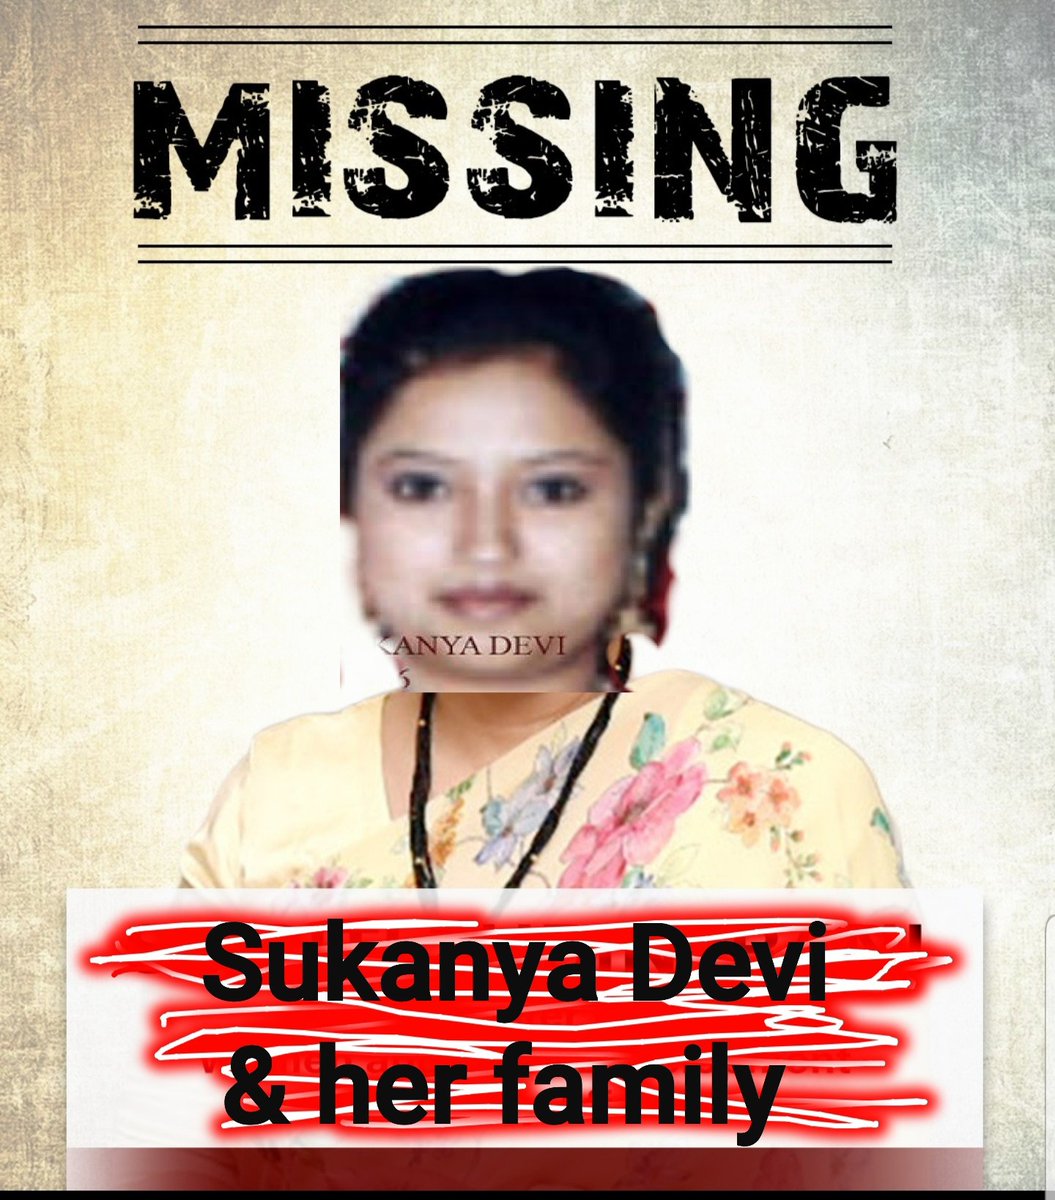 गुमशुदा 
Mr. Rahul Gandhi remember Sukanya devi and her family???? Funny thing the reporters who interviewed her are also missing.